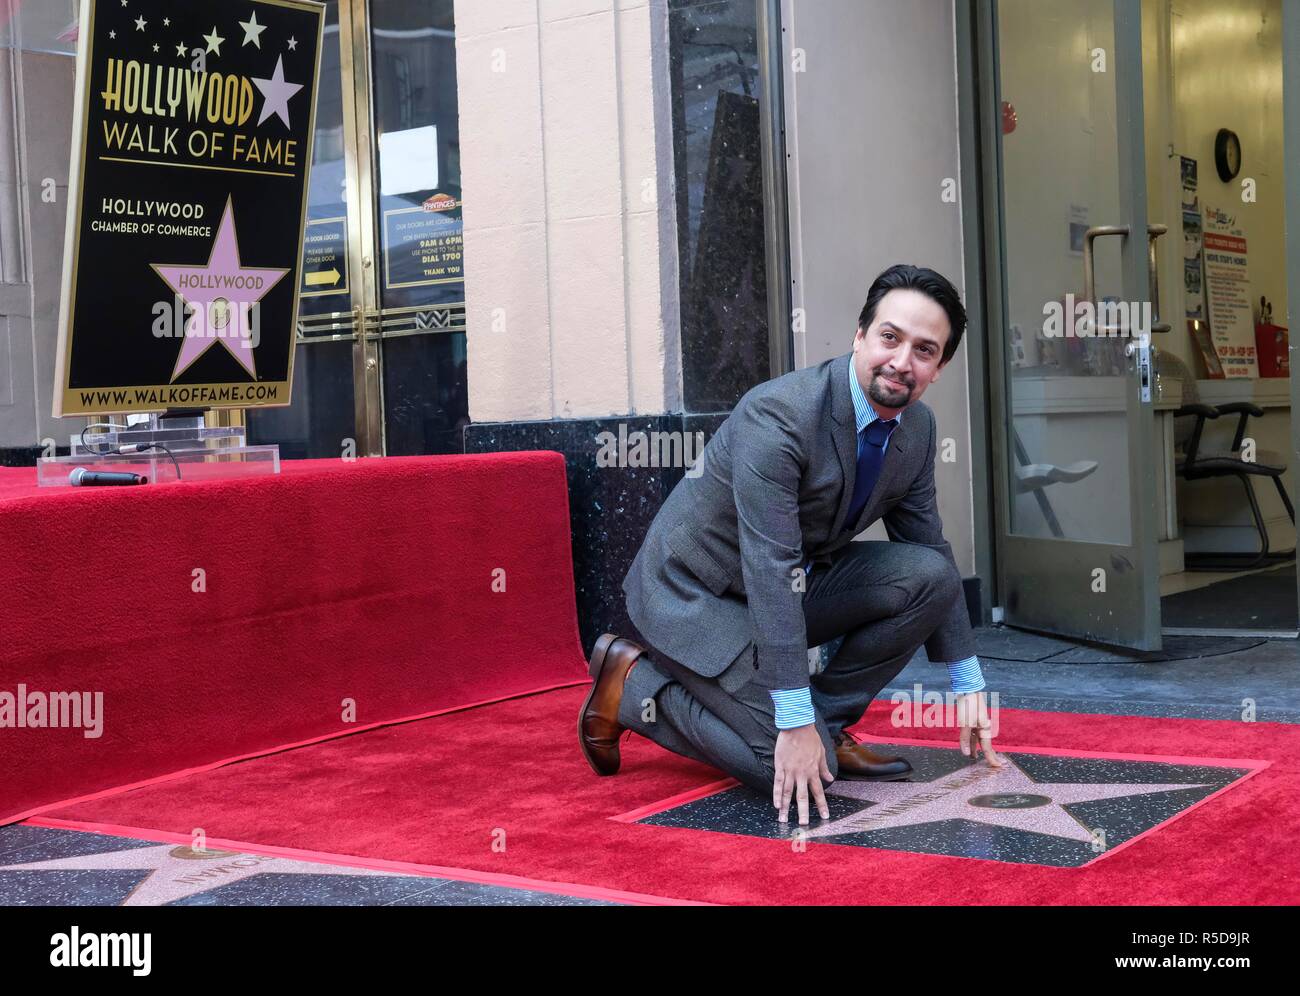 Los Angeles, USA. 30th Nov, 2018. Lin-Manuel Miranda attends his star ceremony on the Hollywood Walk of Fame in Los Angeles, the United States, Nov. 30, 2018. Credit: Zhao Hanrong/Xinhua/Alamy Live News Stock Photo